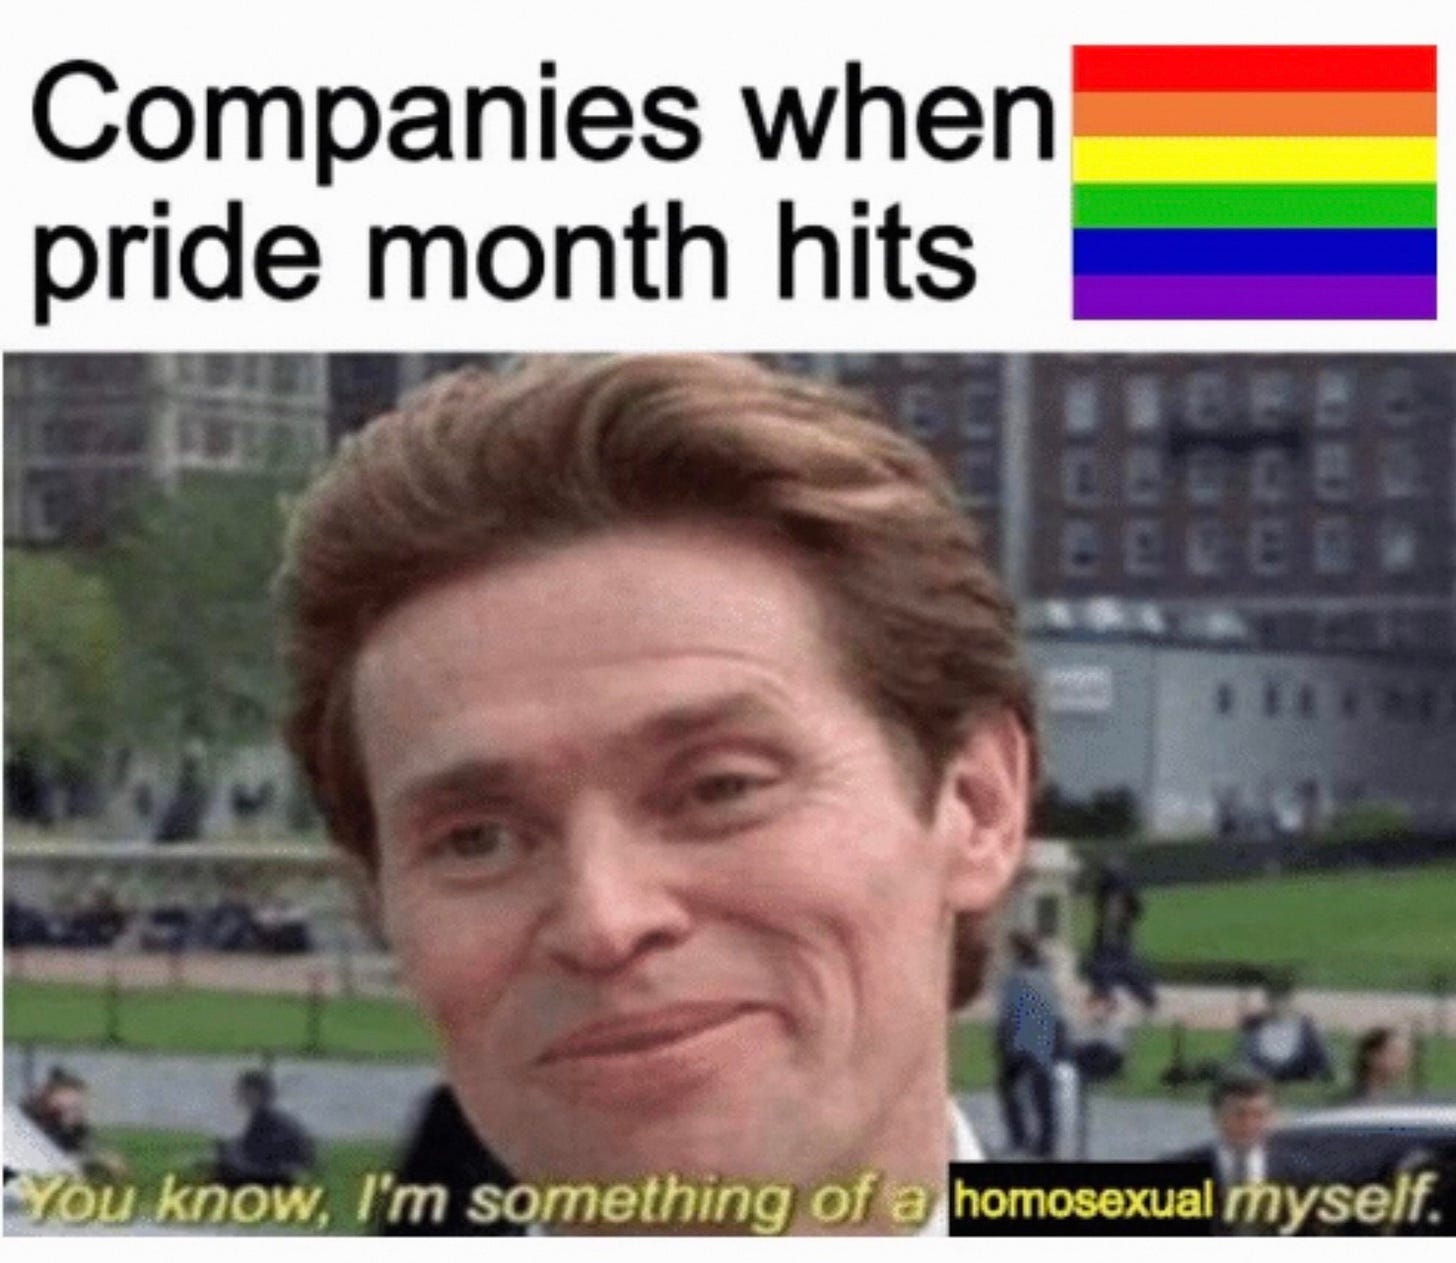 You know, I'm something of a homosexual myself : raimimemes